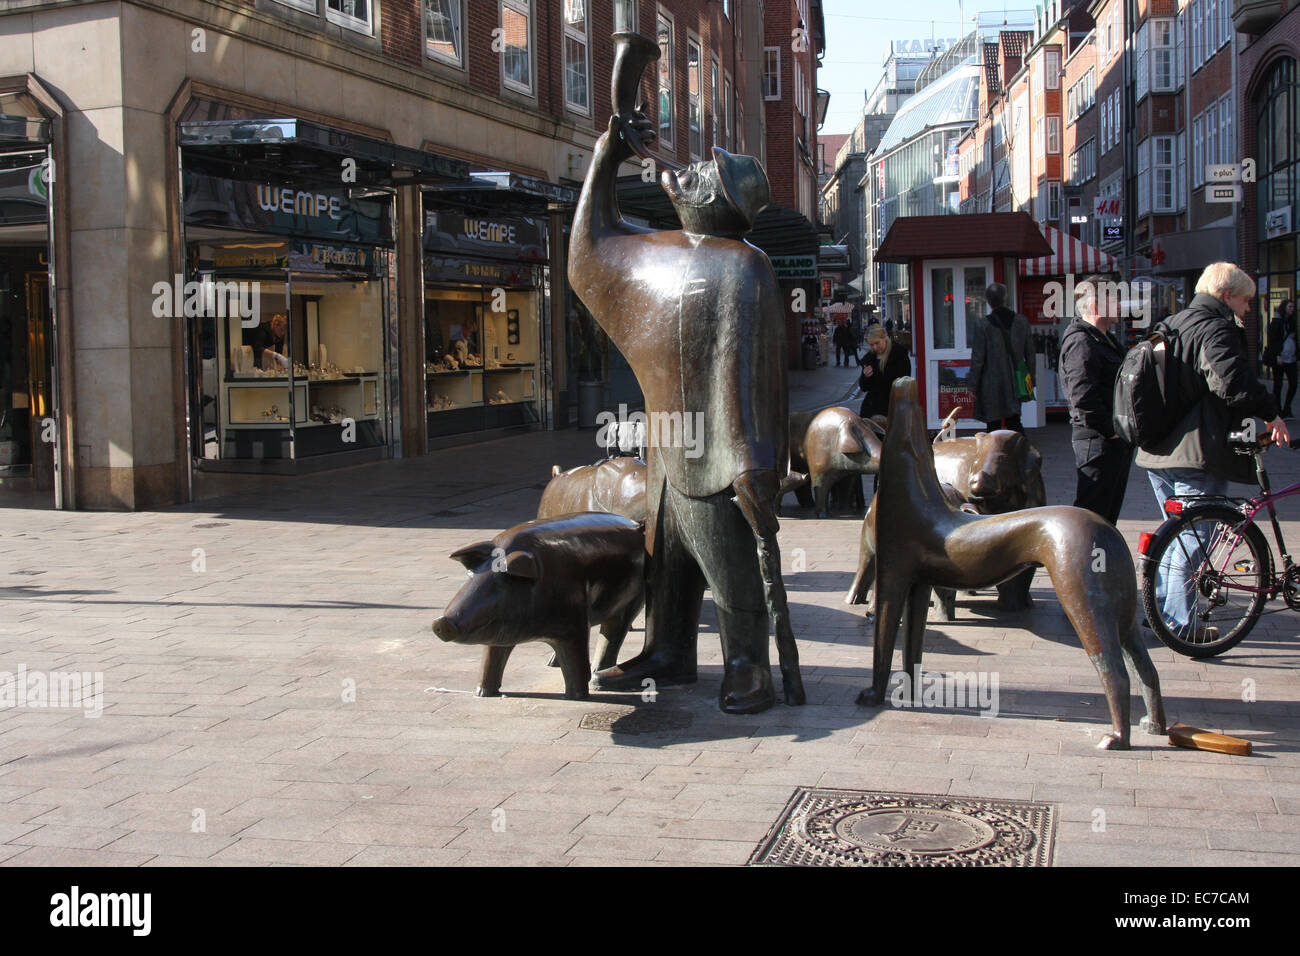 Bronze statues of a pig herdsman with his pigs in the Soege street. In the Middle Ages (sows = Soege) pigs were herded through the Soege street. Photo: Klaus Nowottnick Date: March 23, 2012 Stock Photo